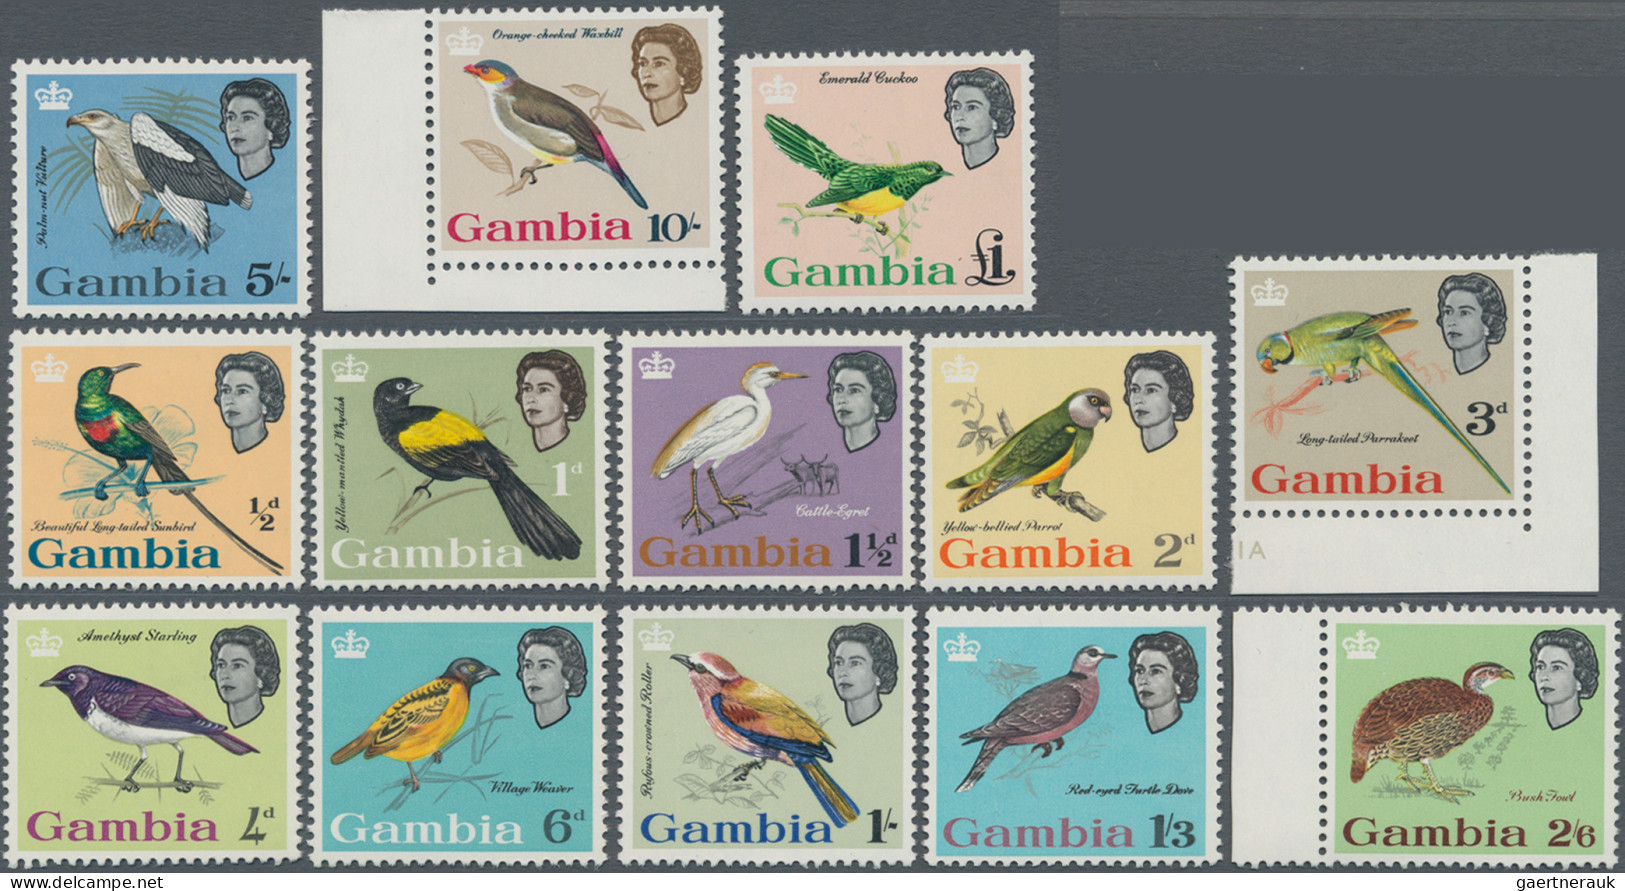 The Gambia: 1938/1963, seven sets, including four KGVI definitive sets of 1938,